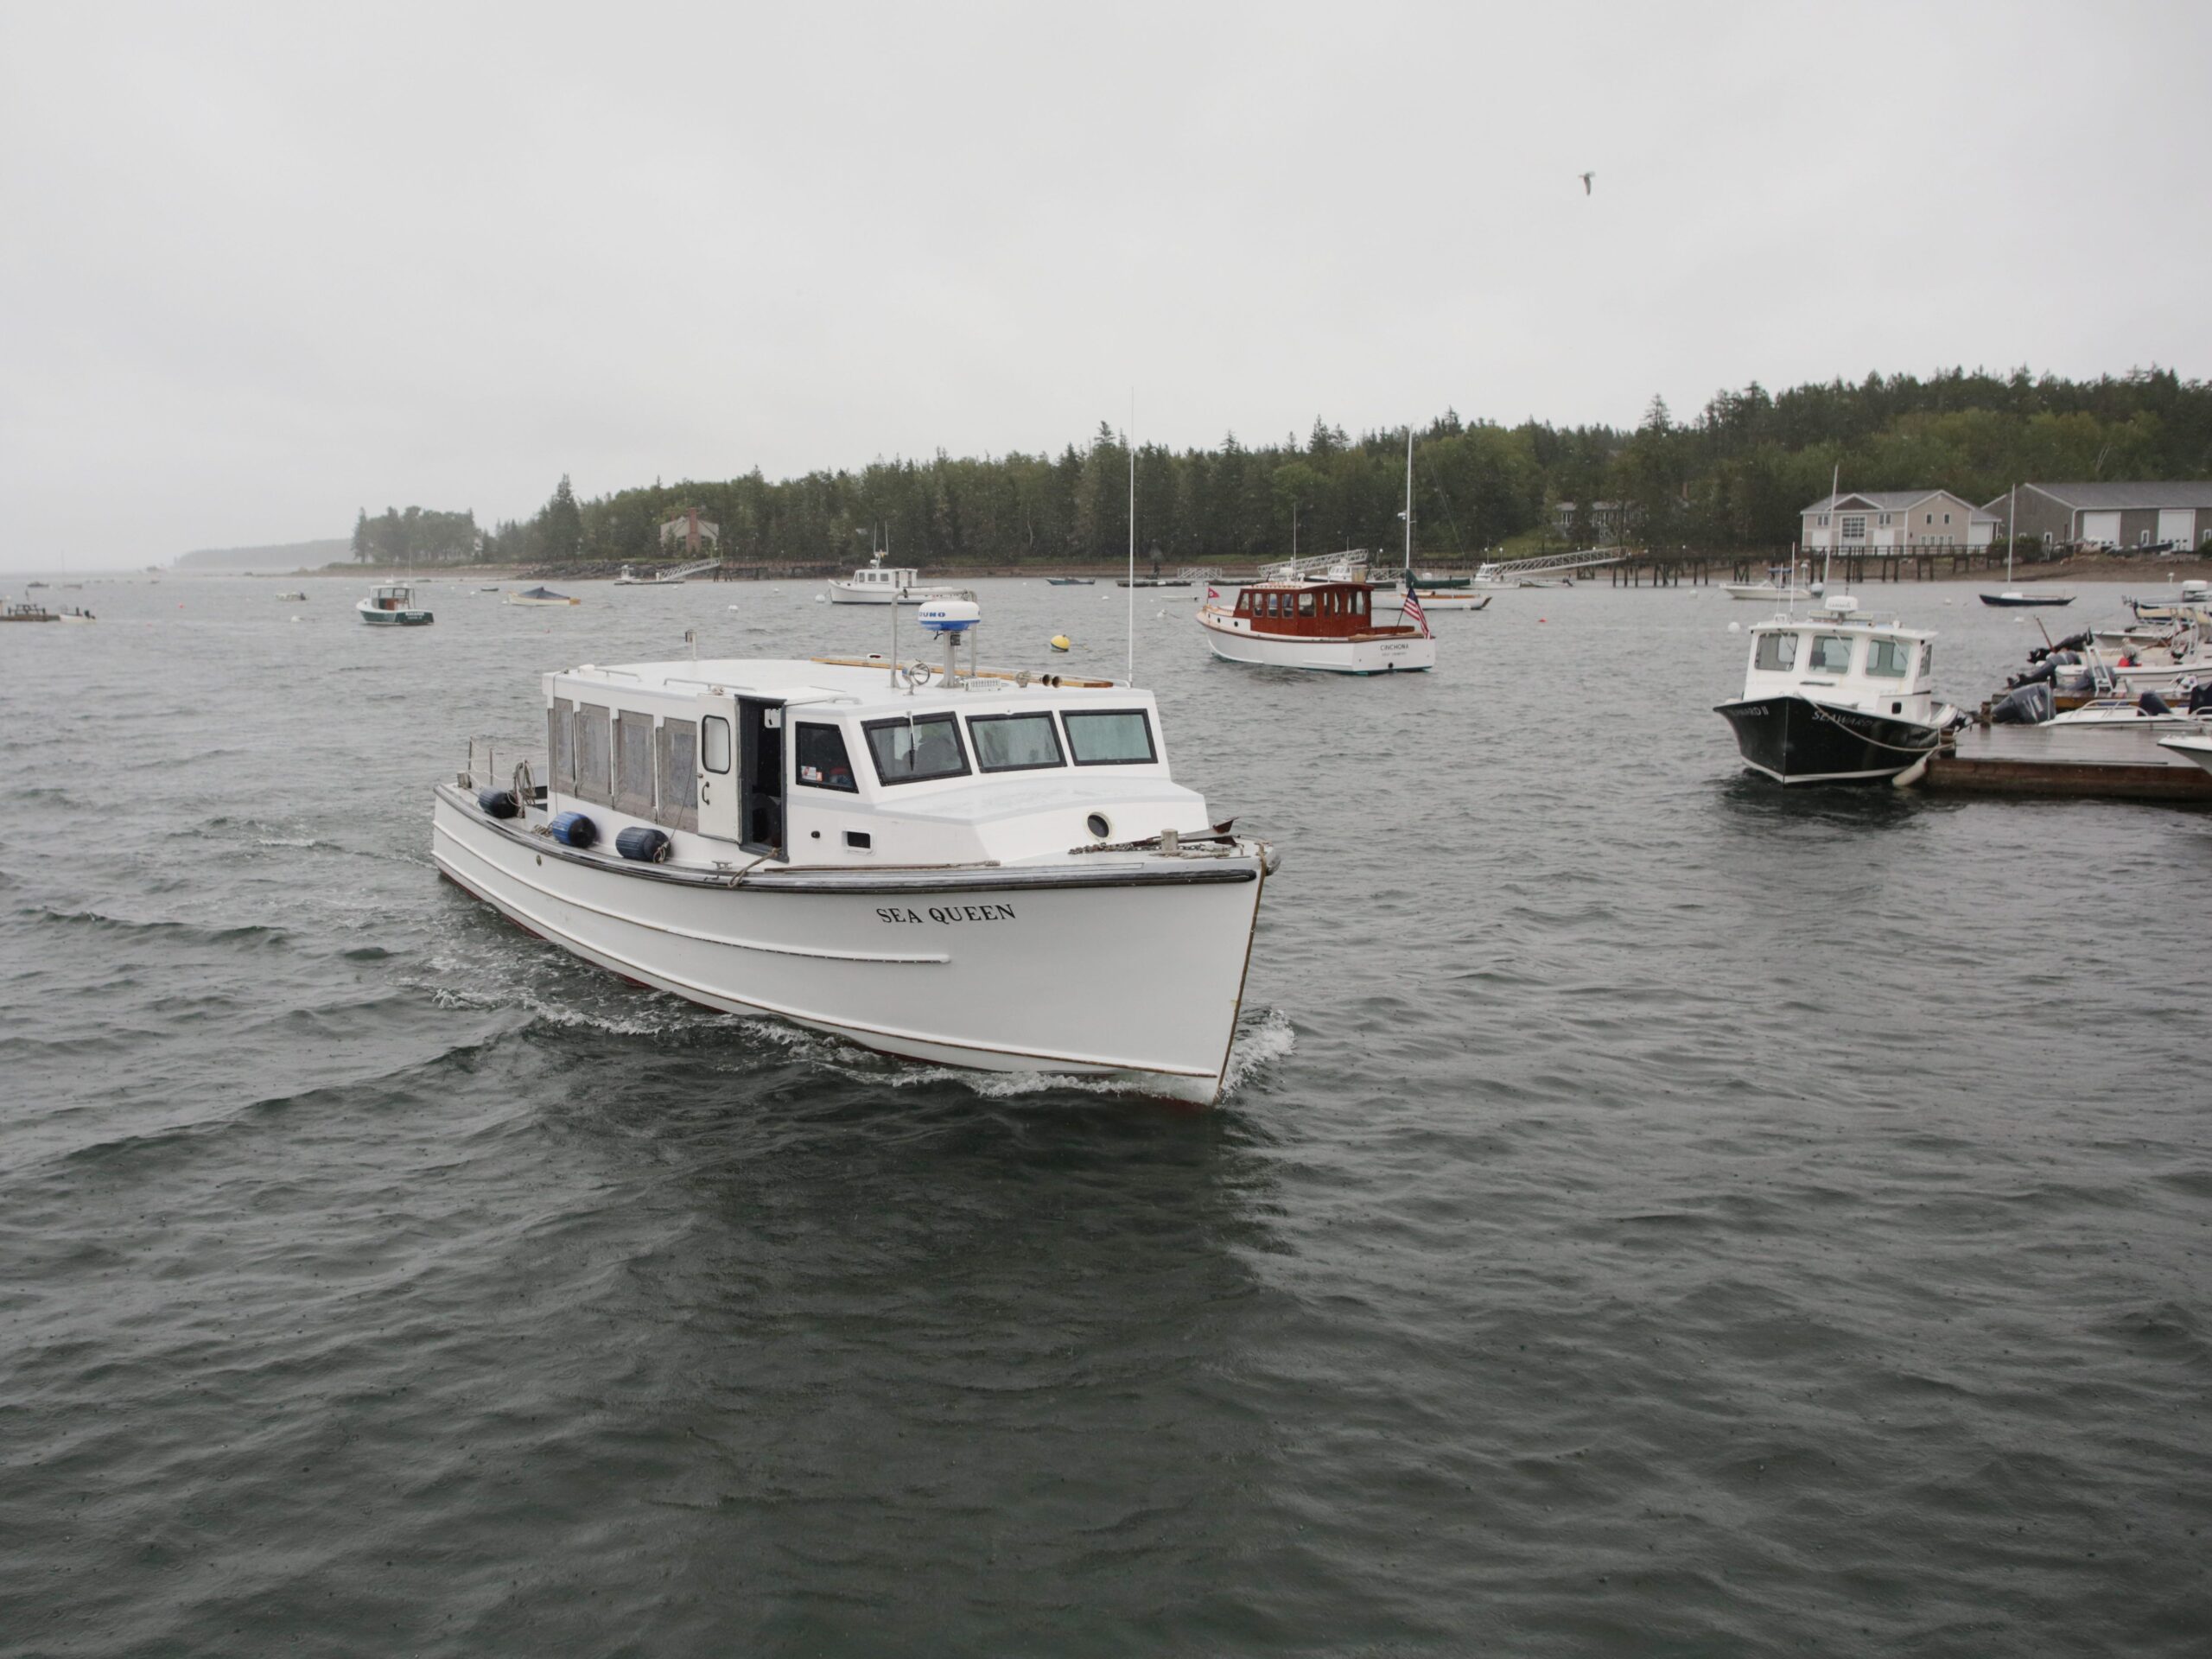 A white boat surrounded by other boats in a harbor